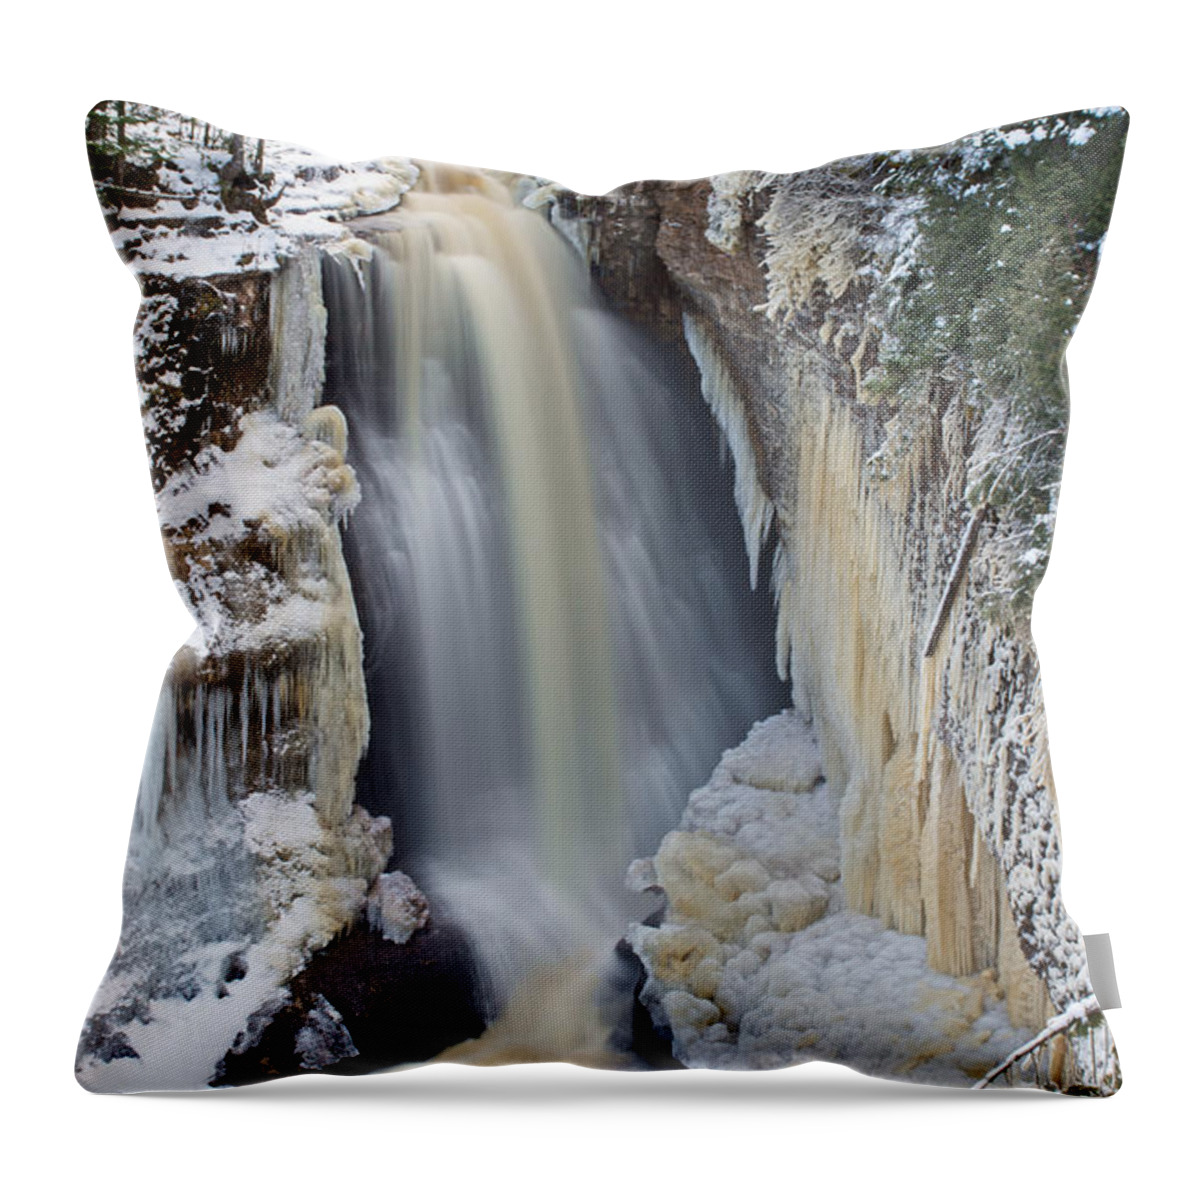 Miners Falls Throw Pillow featuring the photograph Miners Falls In The Snow by Gary McCormick